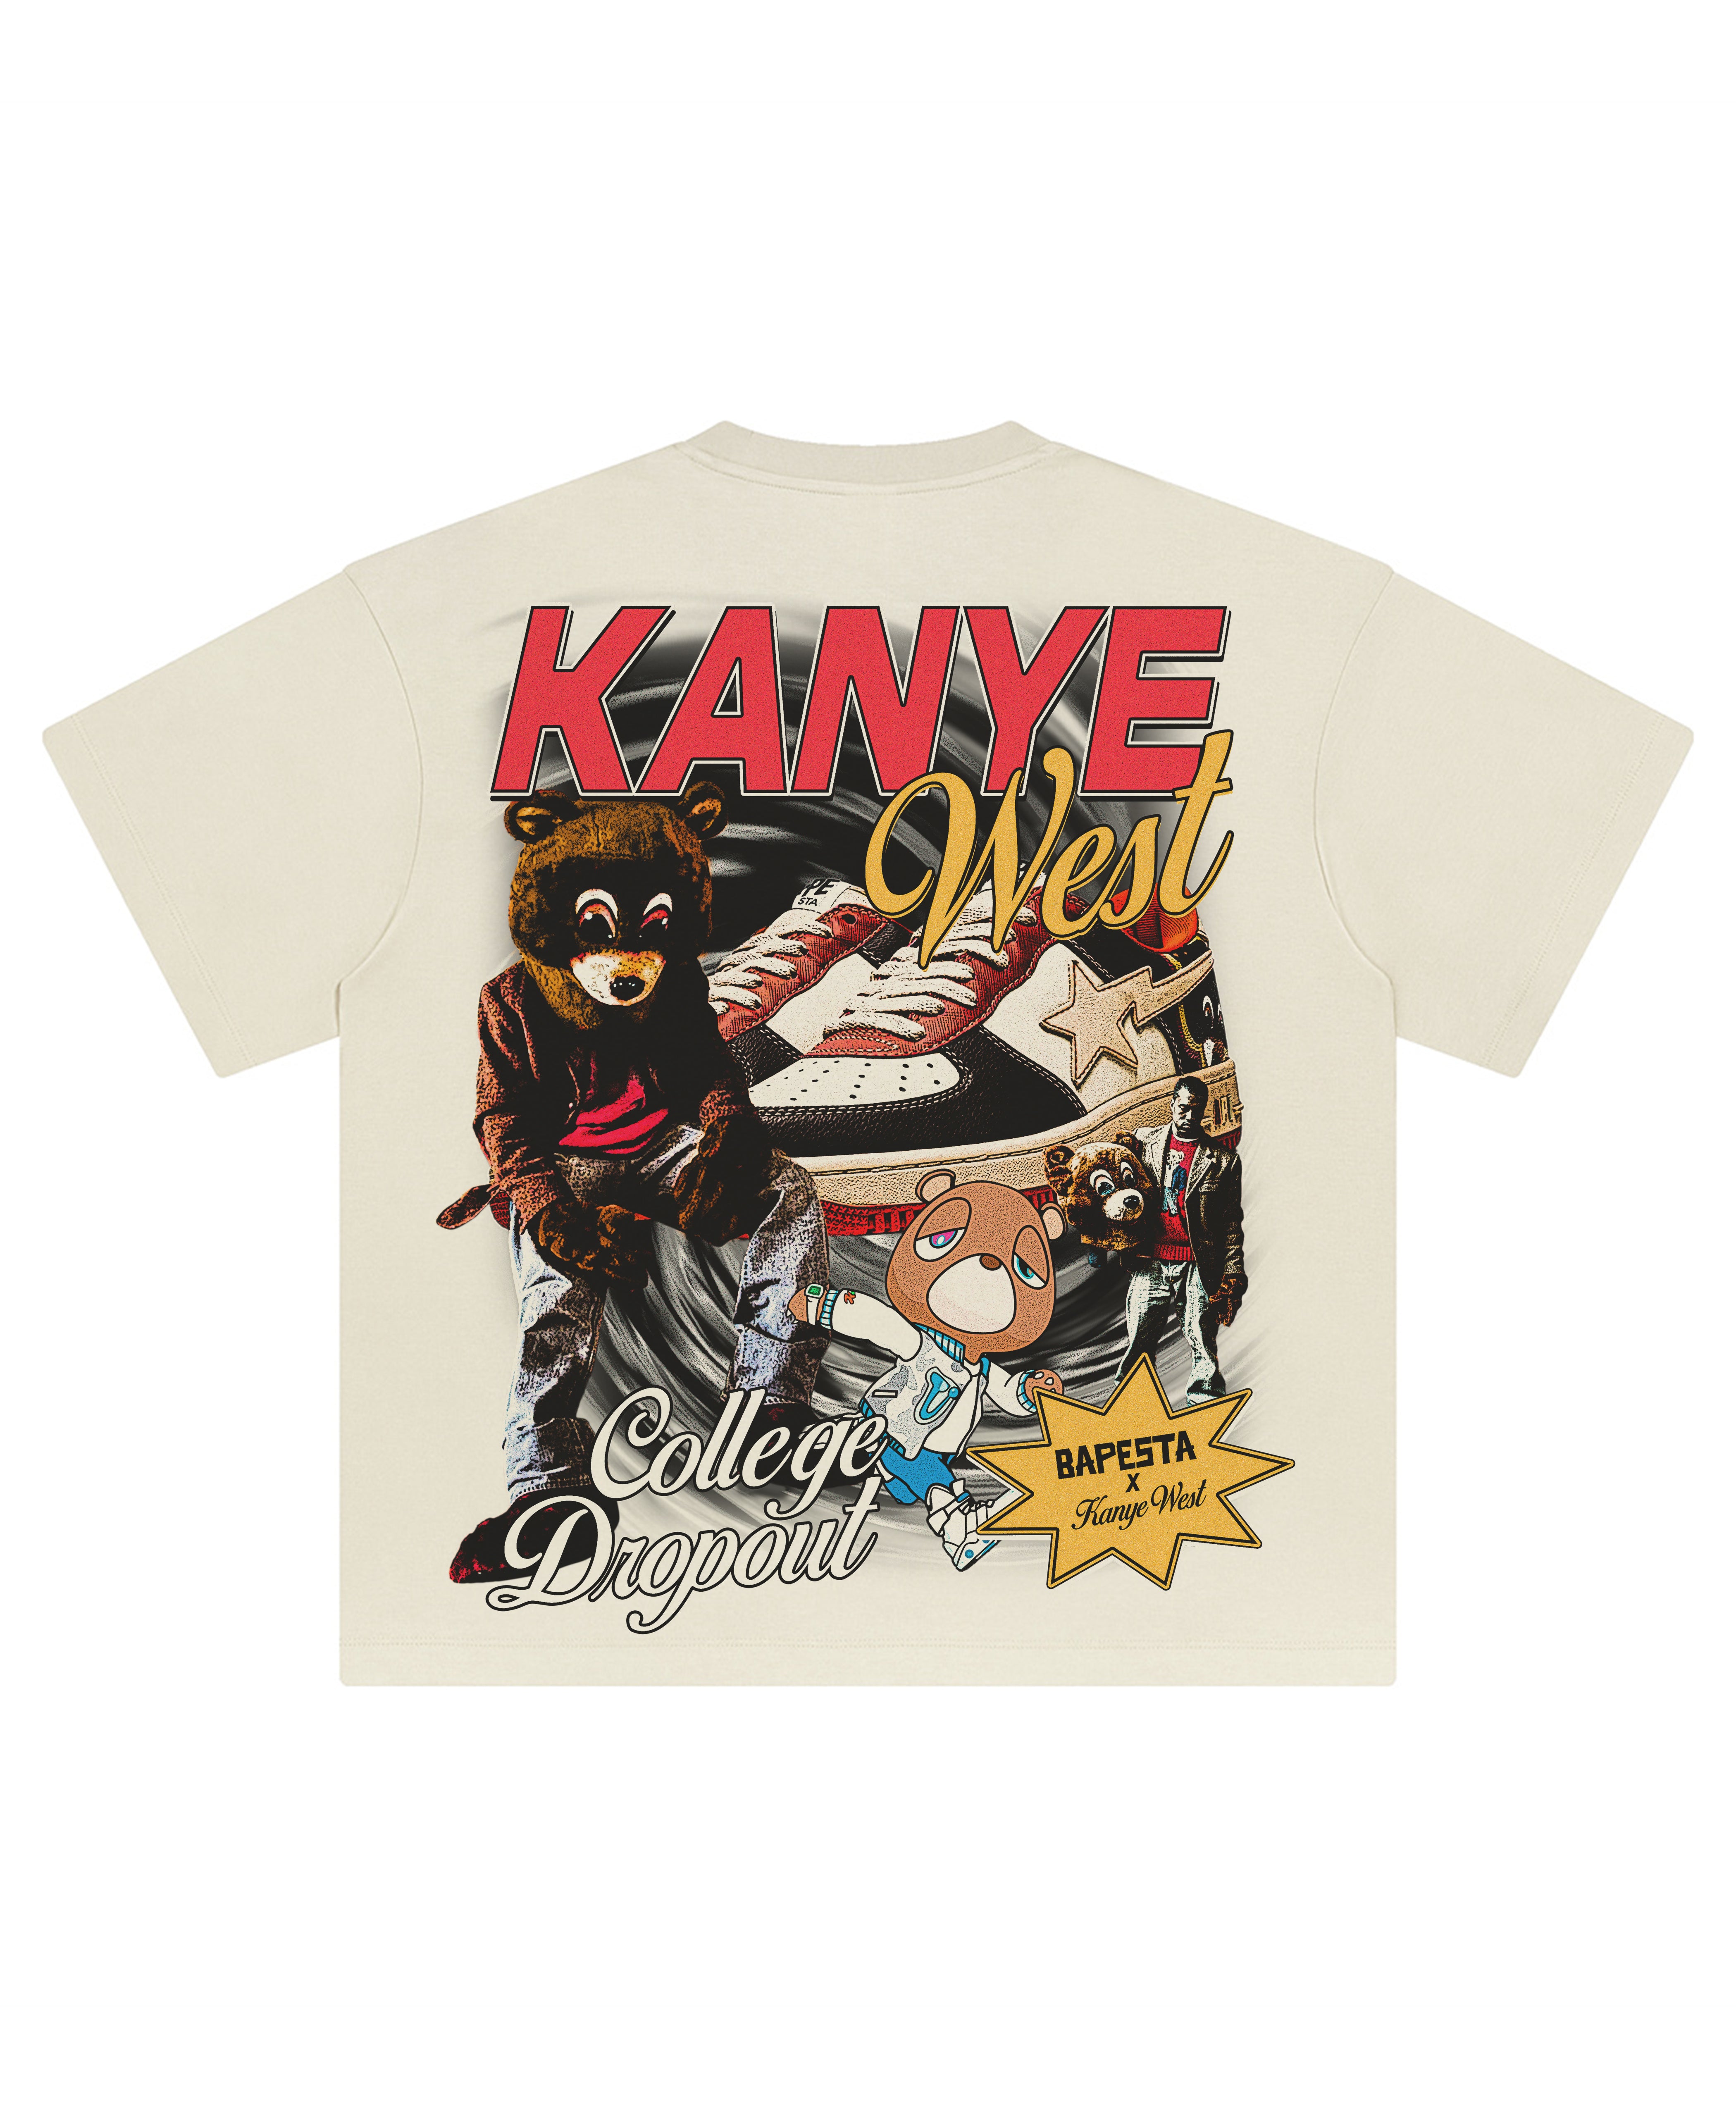 KANYE COLLEGE DROPOUT TEE